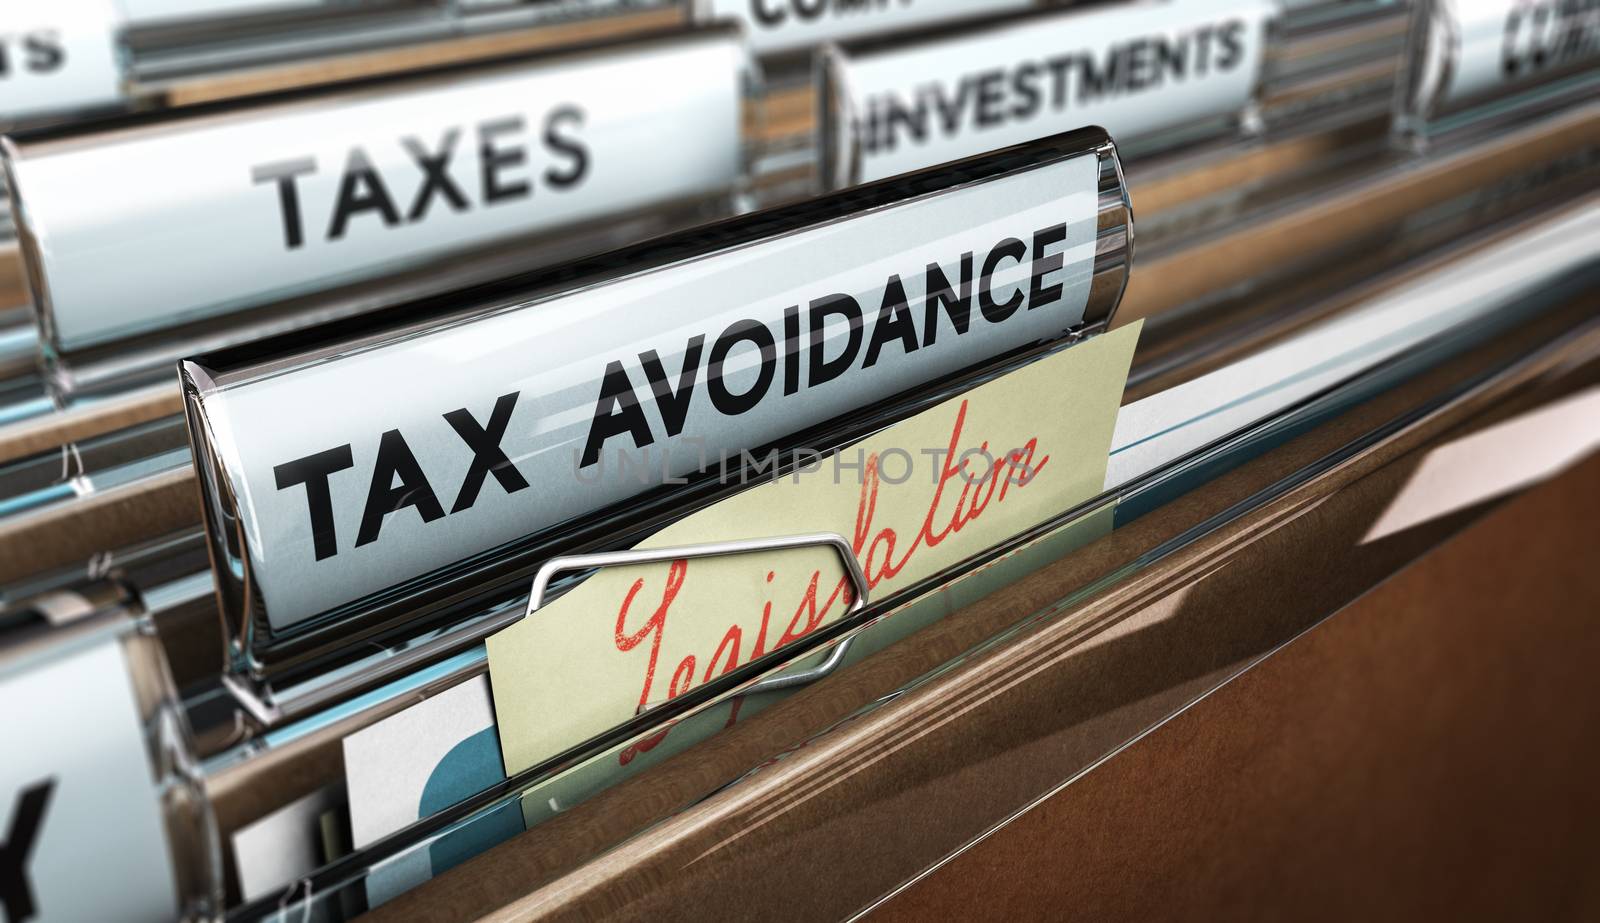 Tax Avoidance and Legislation by Olivier-Le-Moal